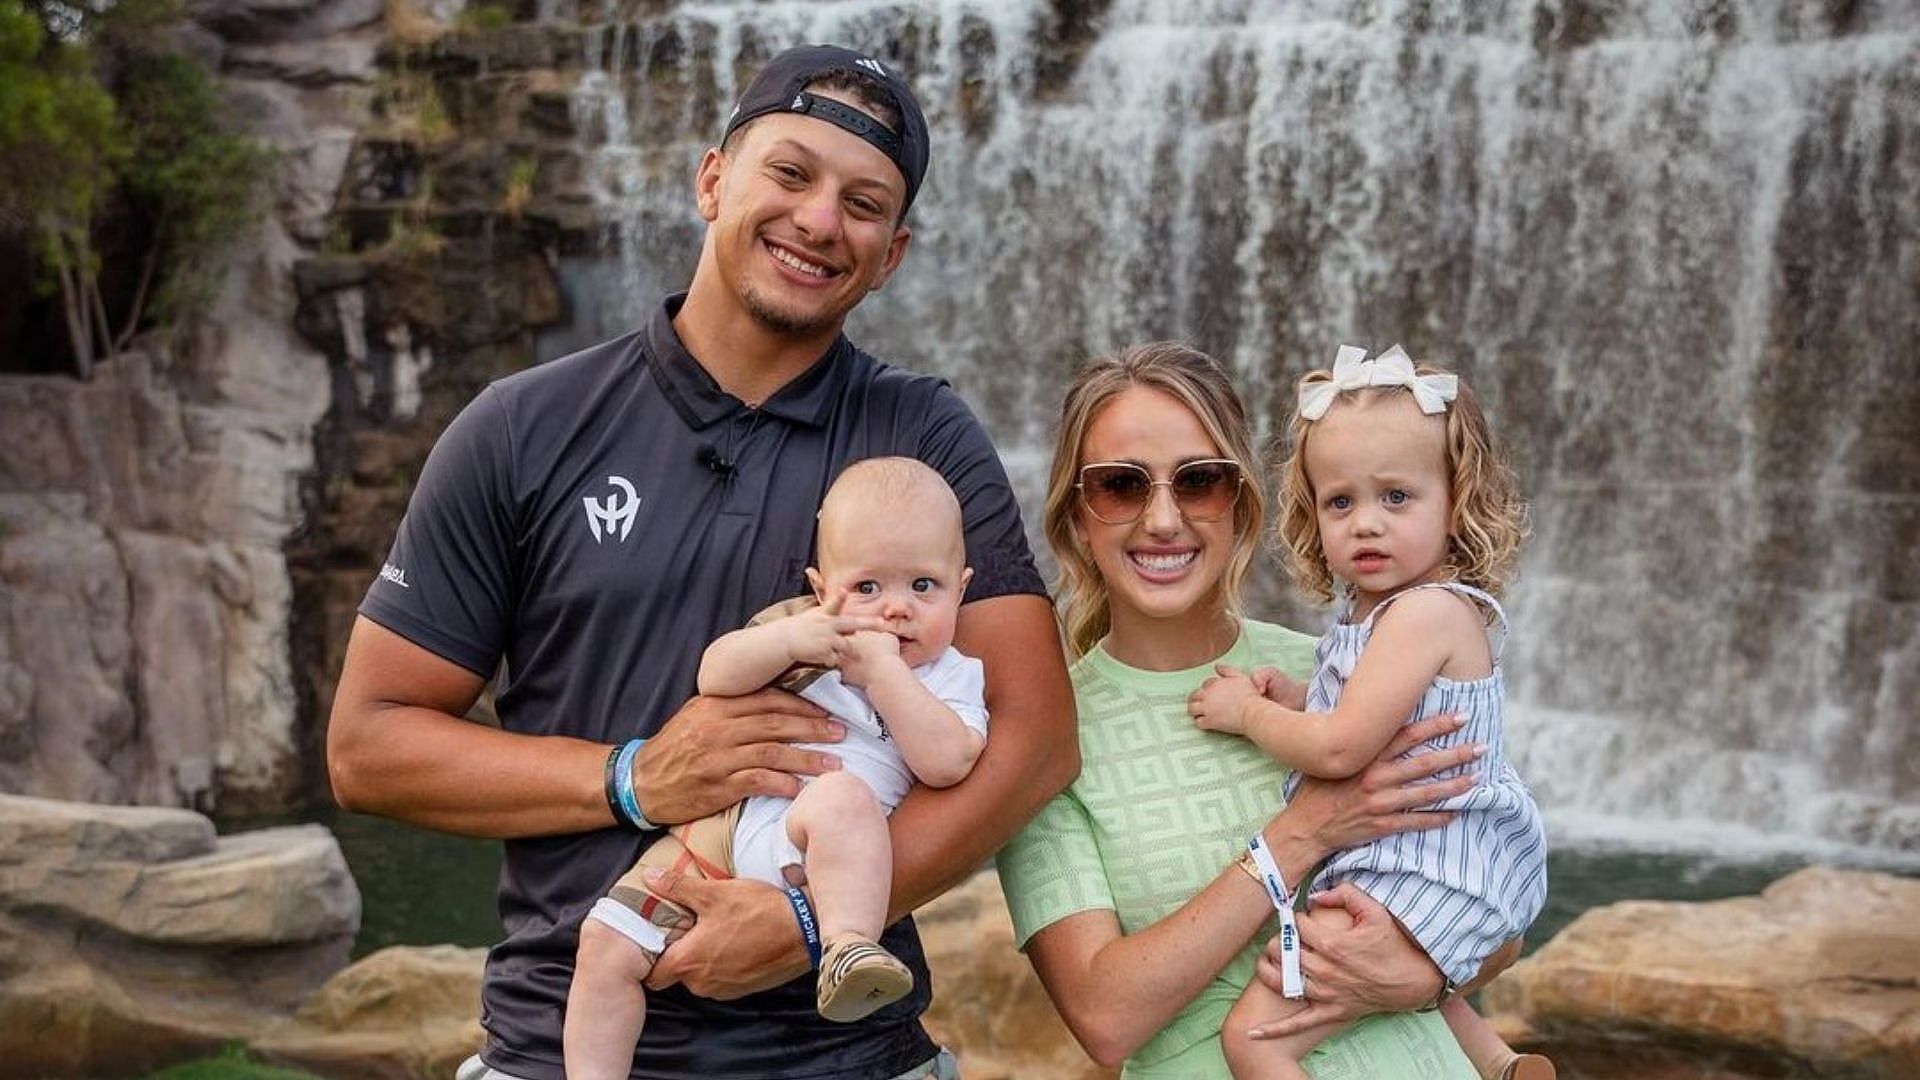 IN PHOTOS: Patrick and Brittany Mahomes son Bronze achieves major milestone ahead of first birthday